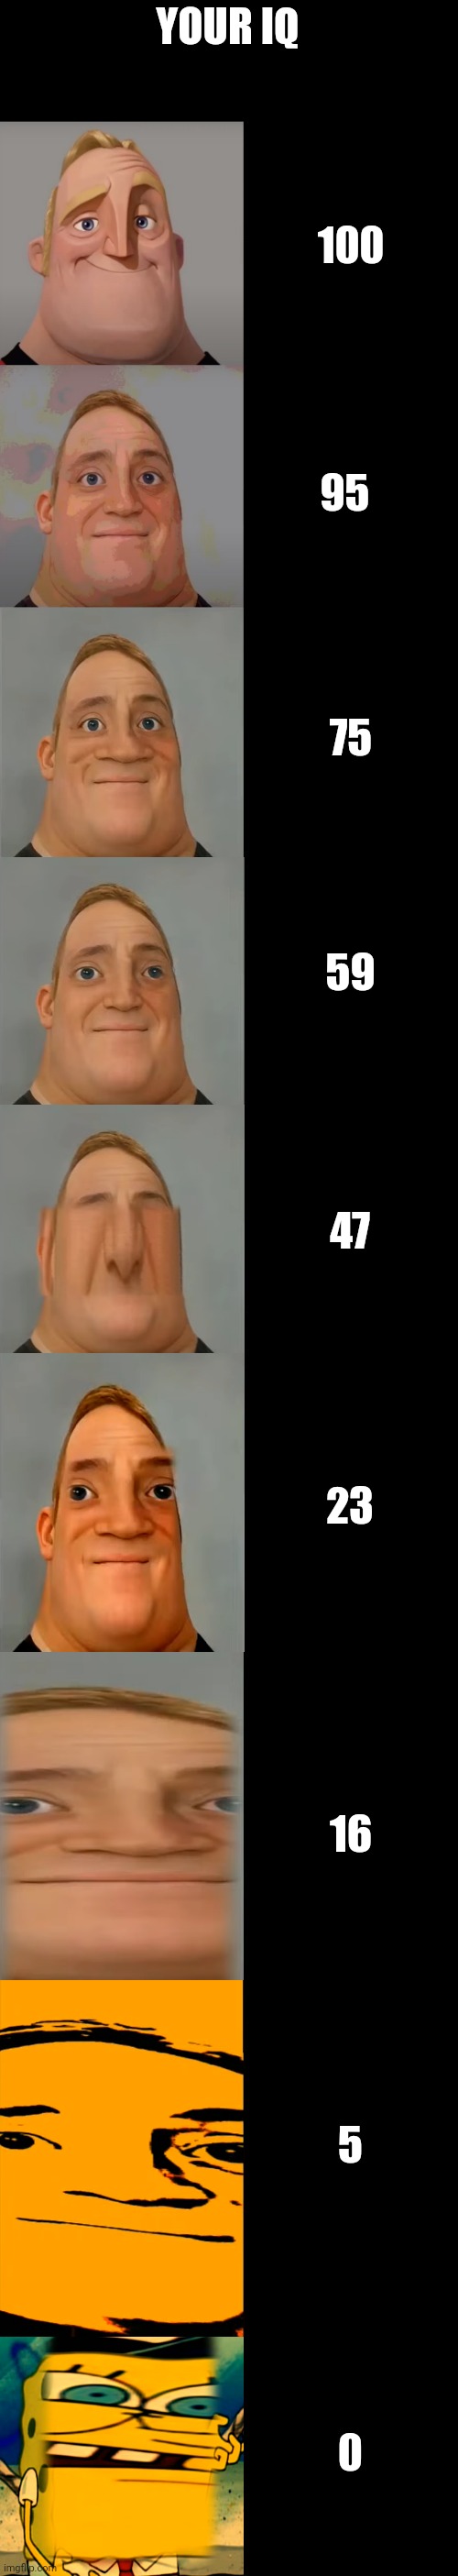 Mr Incredible becoming Idiot template | YOUR IQ; 100; 95; 75; 59; 47; 23; 16; 5; 0 | image tagged in mr incredible becoming idiot template | made w/ Imgflip meme maker